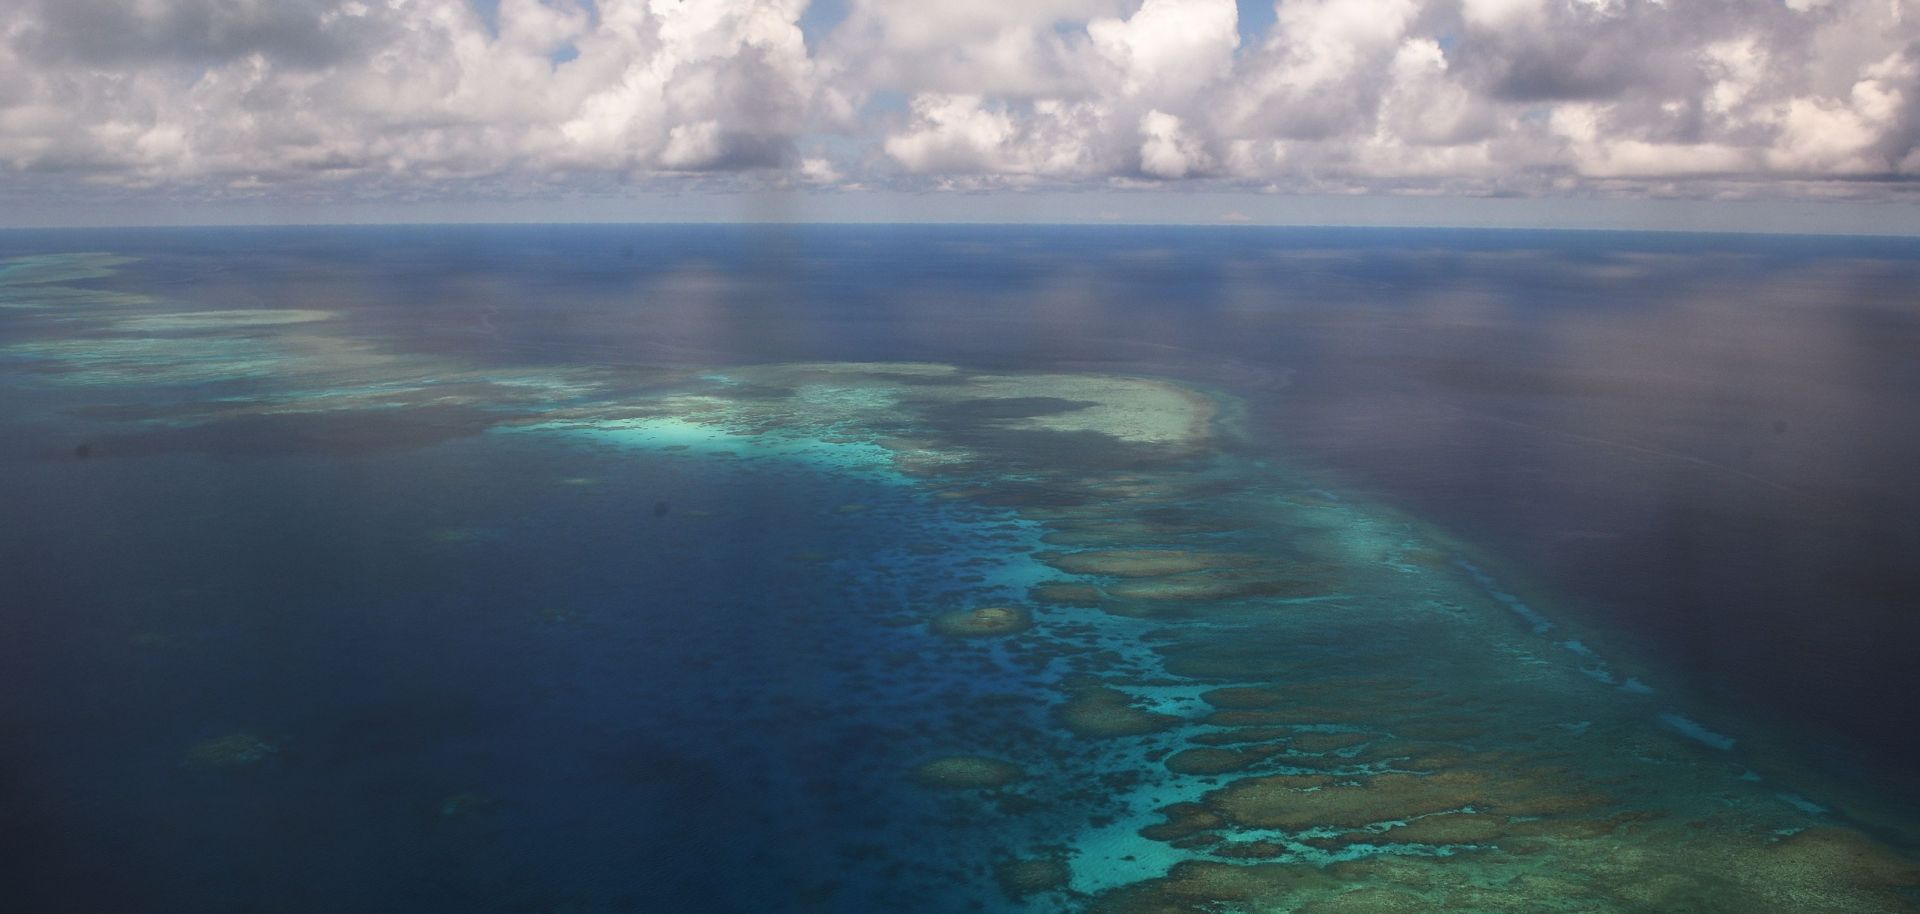 Mischief Reef in the disputed Spratly Islands on April 21, 2017.